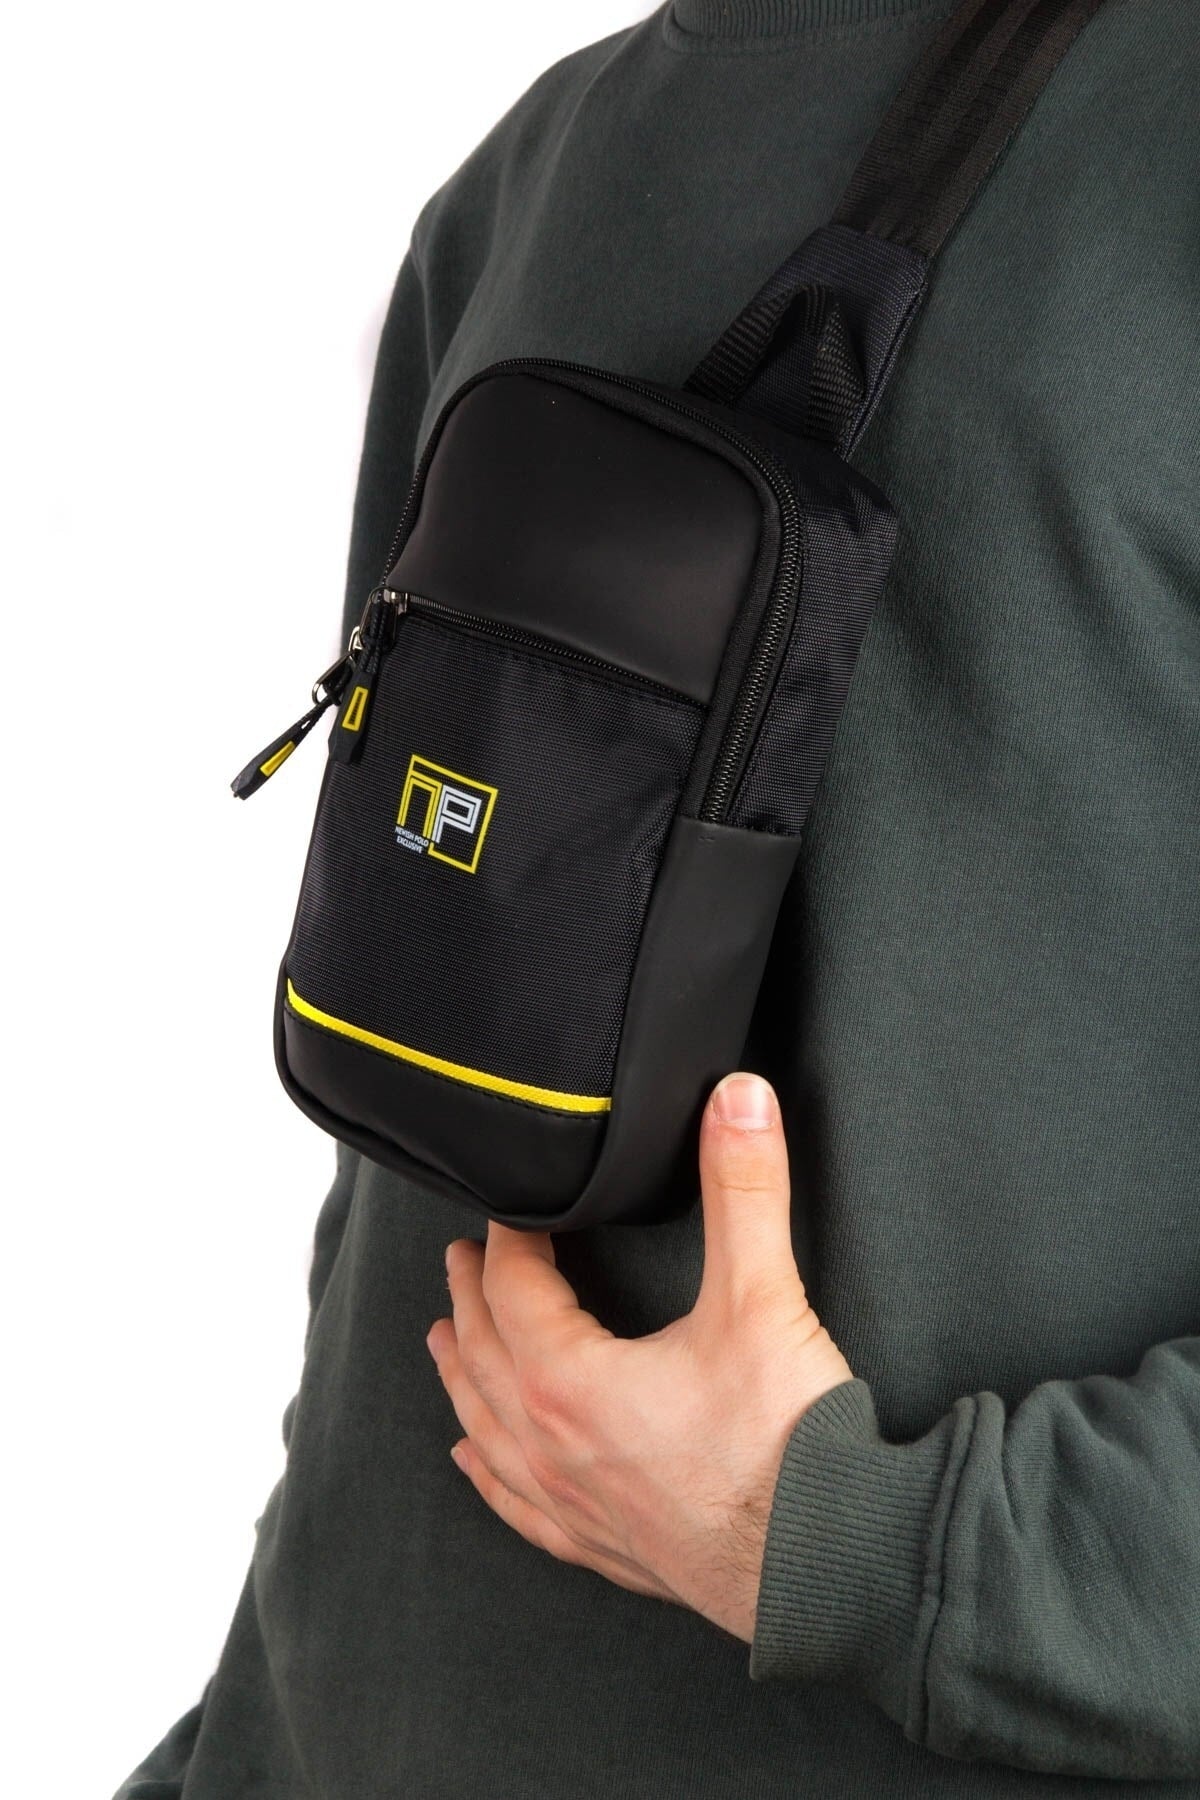 Unisex Impertex Chest Bag With Phone Compartment And Cross Shoulder Bag Suitable For Daily Use